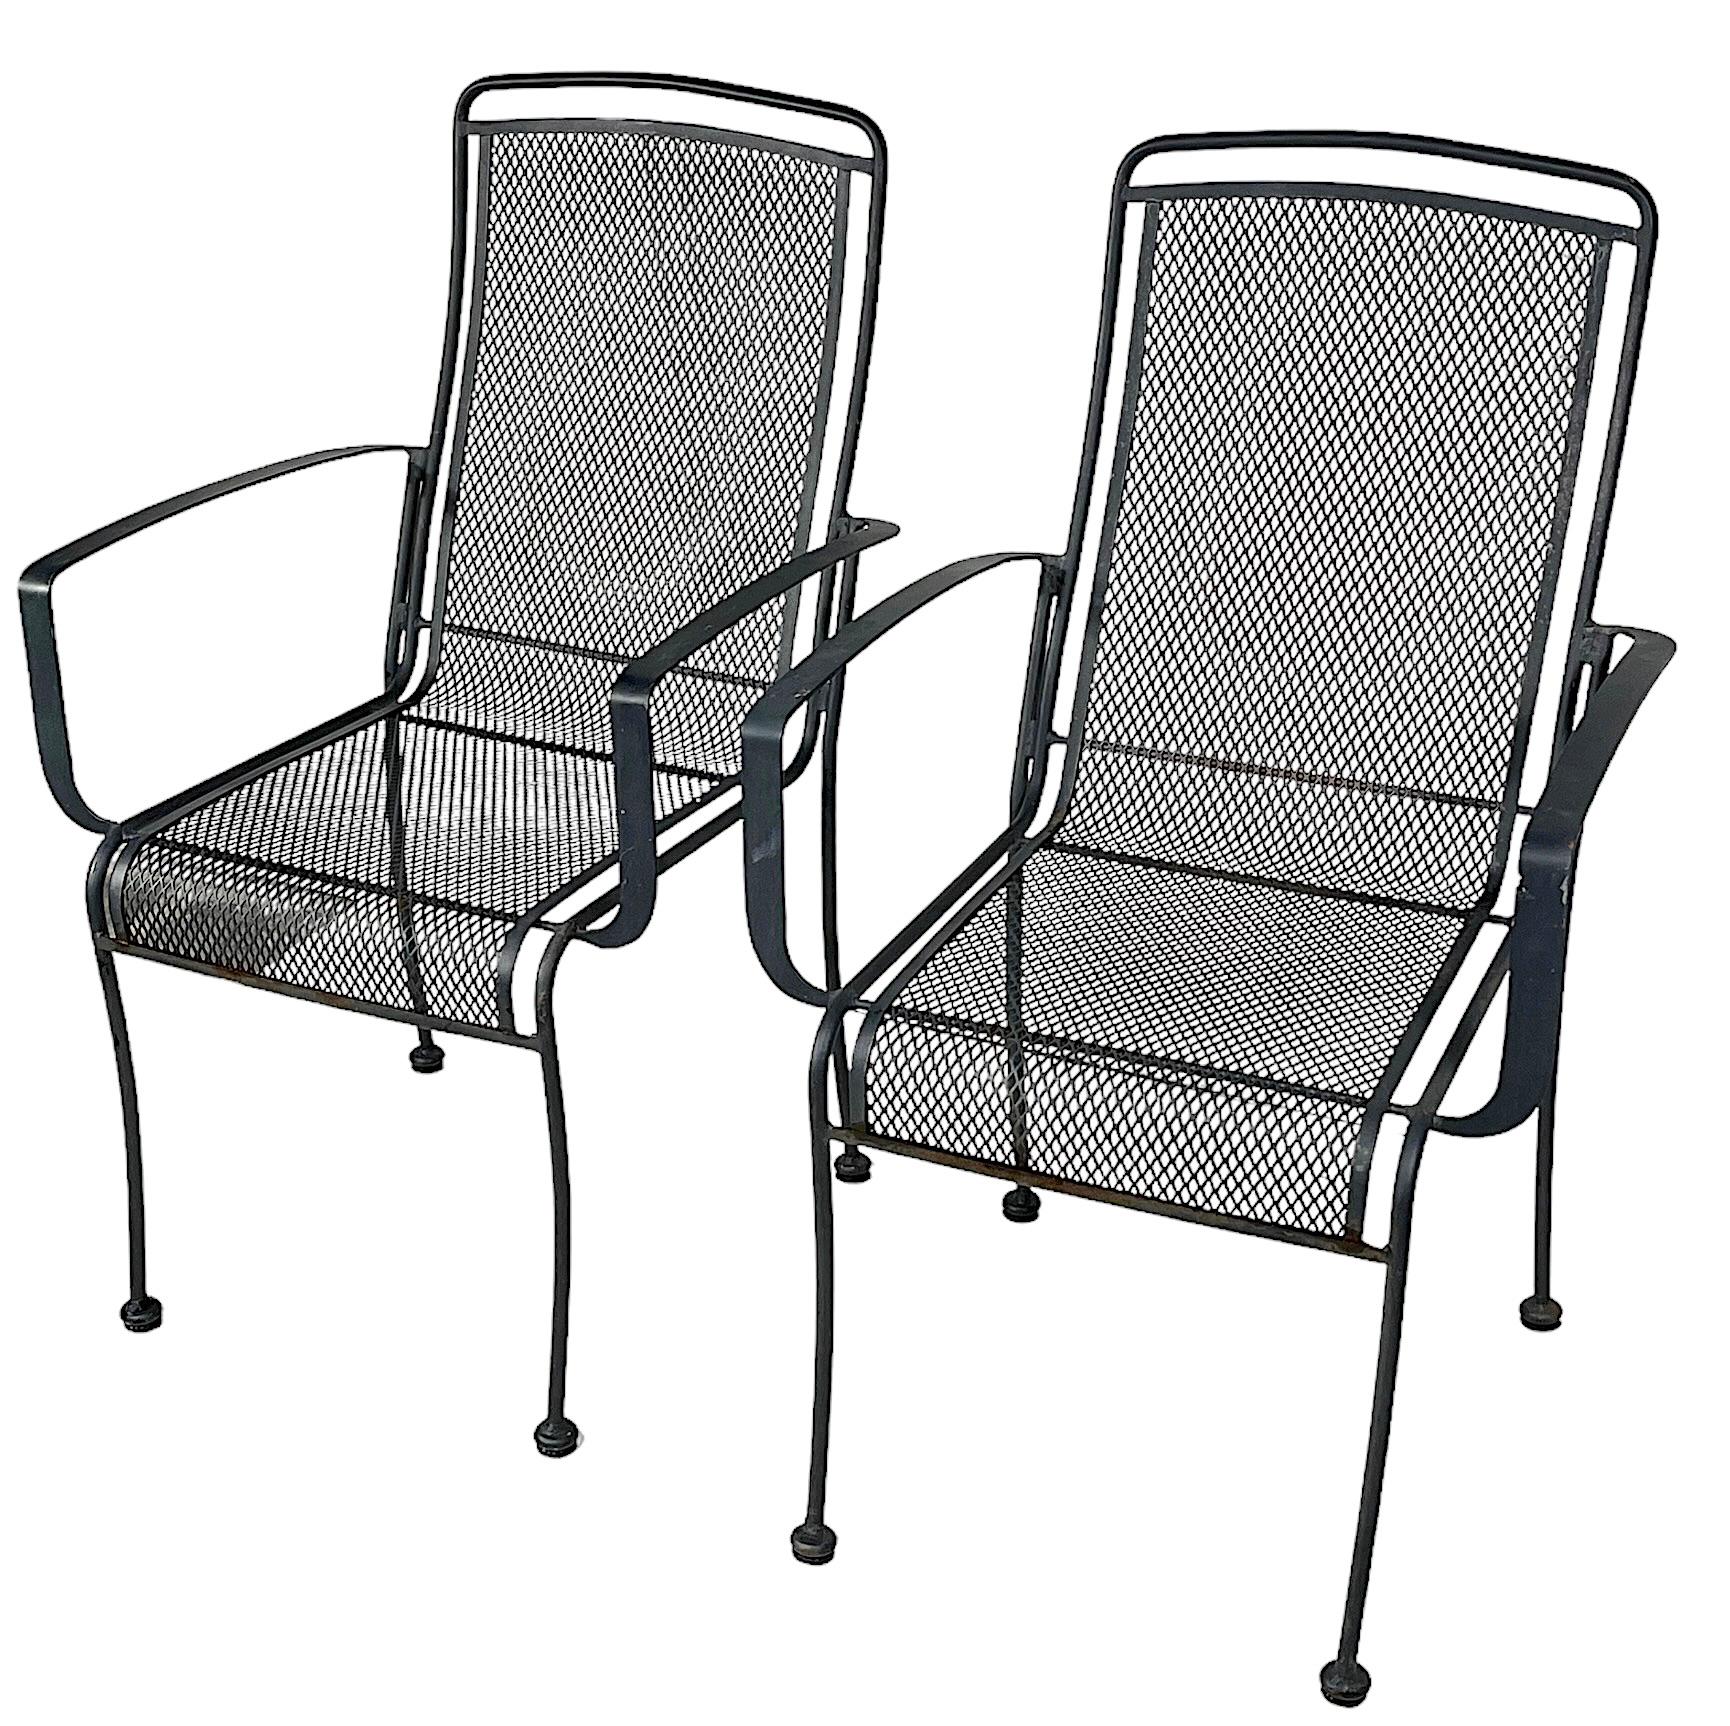 Pr. metal garden, patios or  poolside, dining height arm chairs attributed to Woodard, in the style of Tempestini, circa 1970/980's. The chairs are in good, original condition, showing only light cosmetic wear to finish normal and consistent with